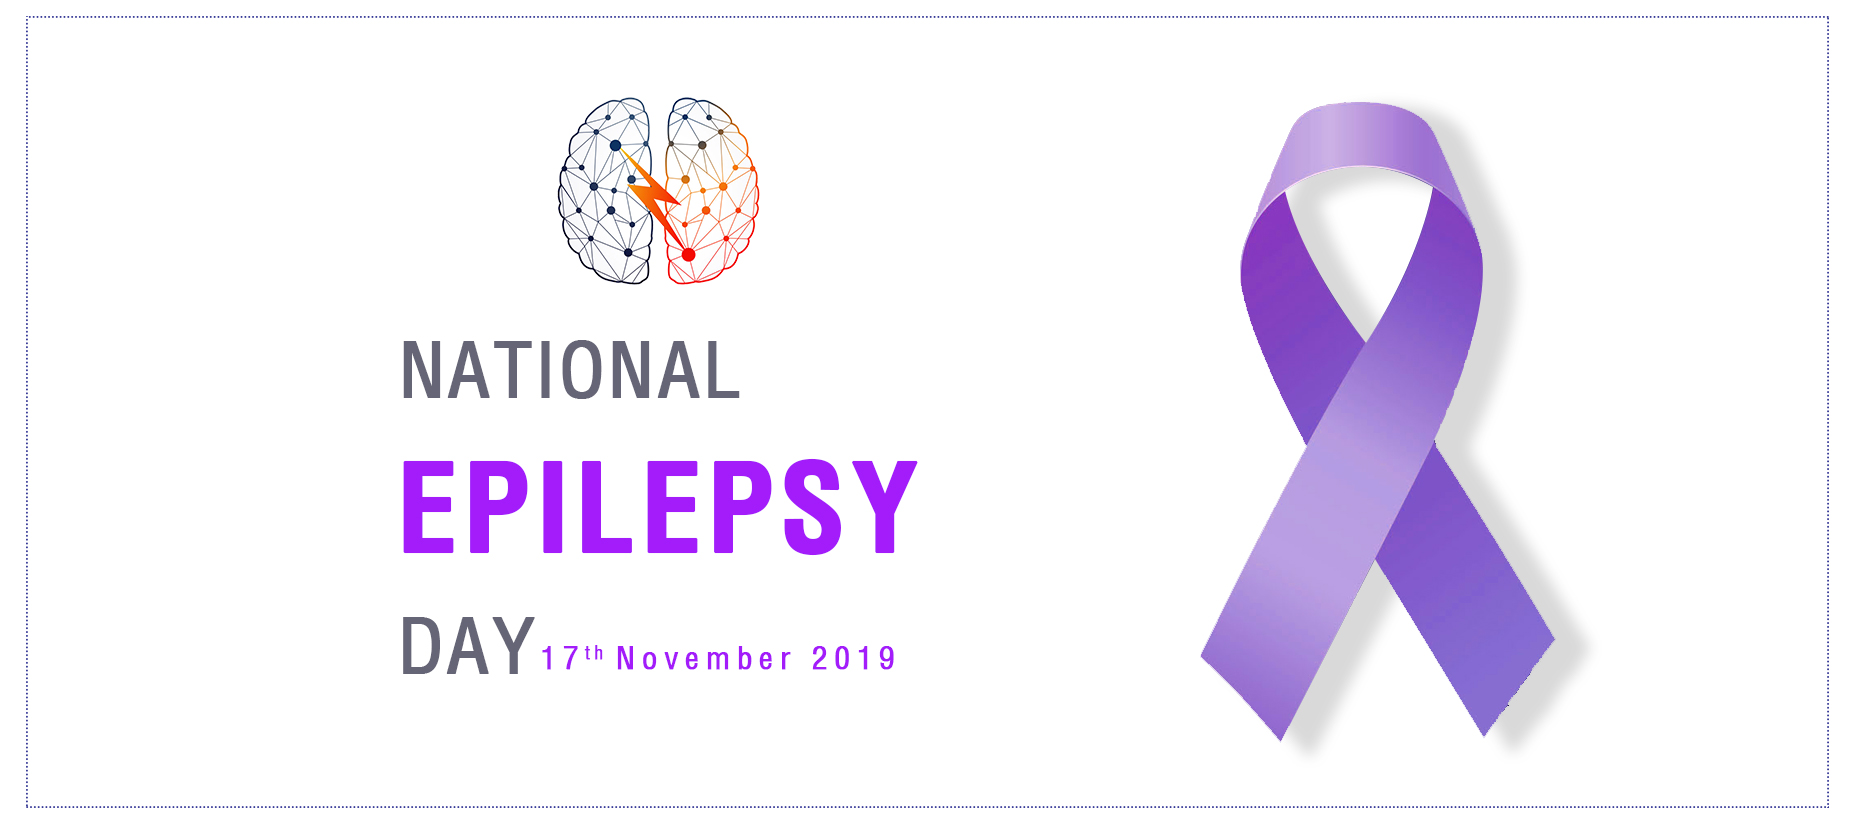 National Epilepsy Day – Find Help and Support